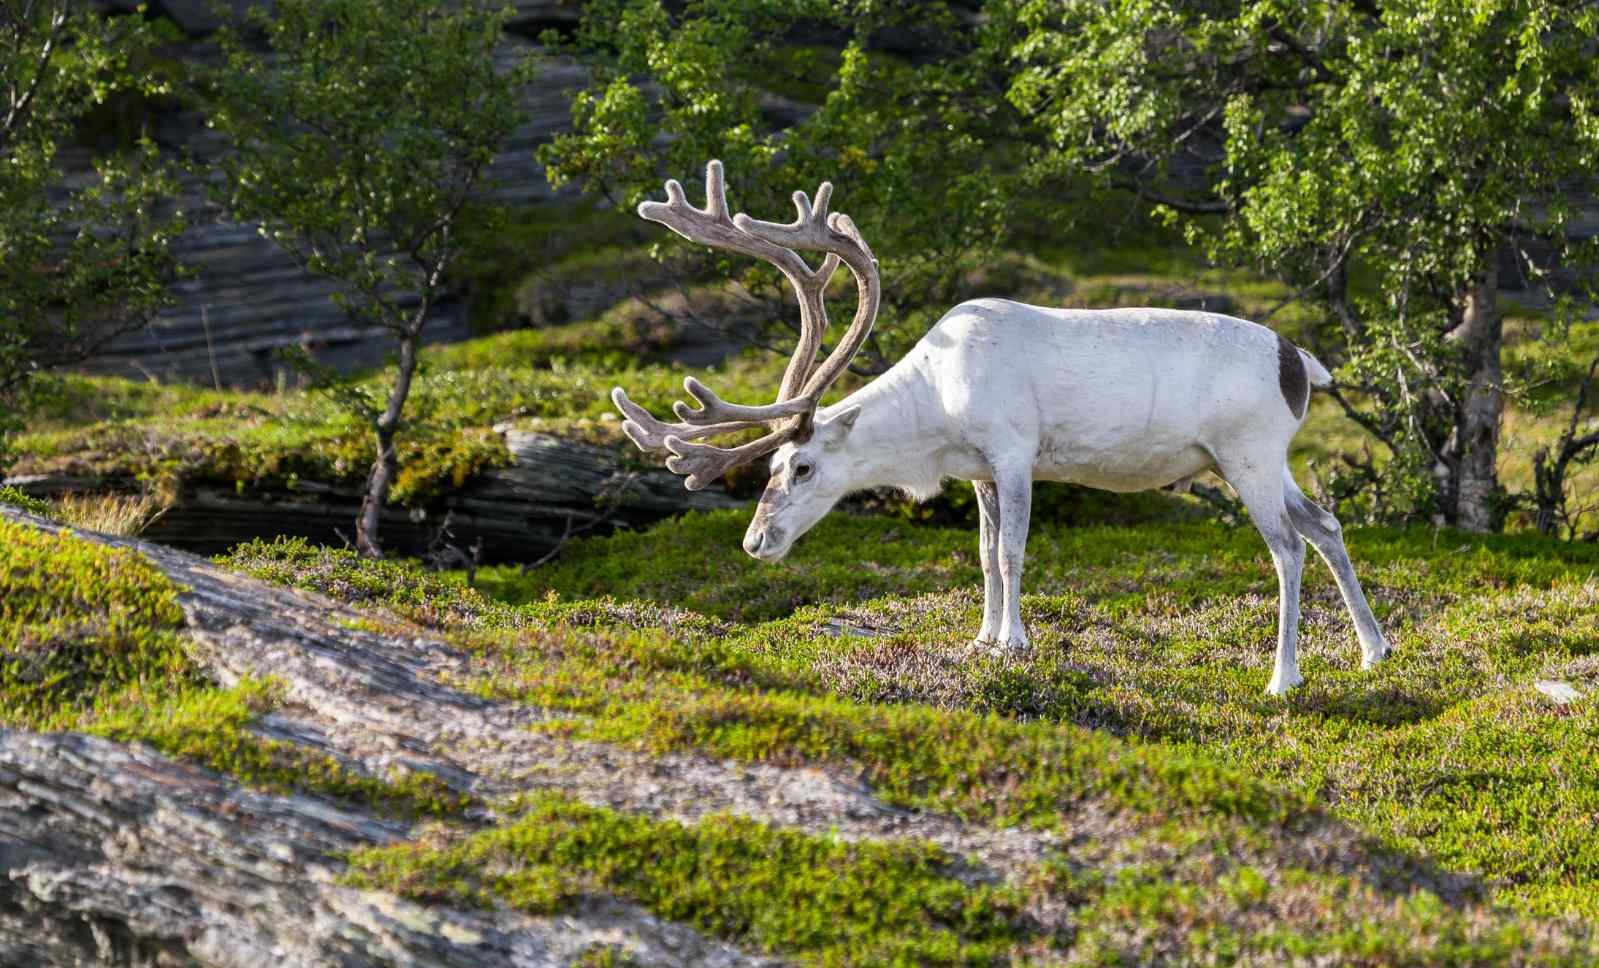 The Legend of the white reindeer